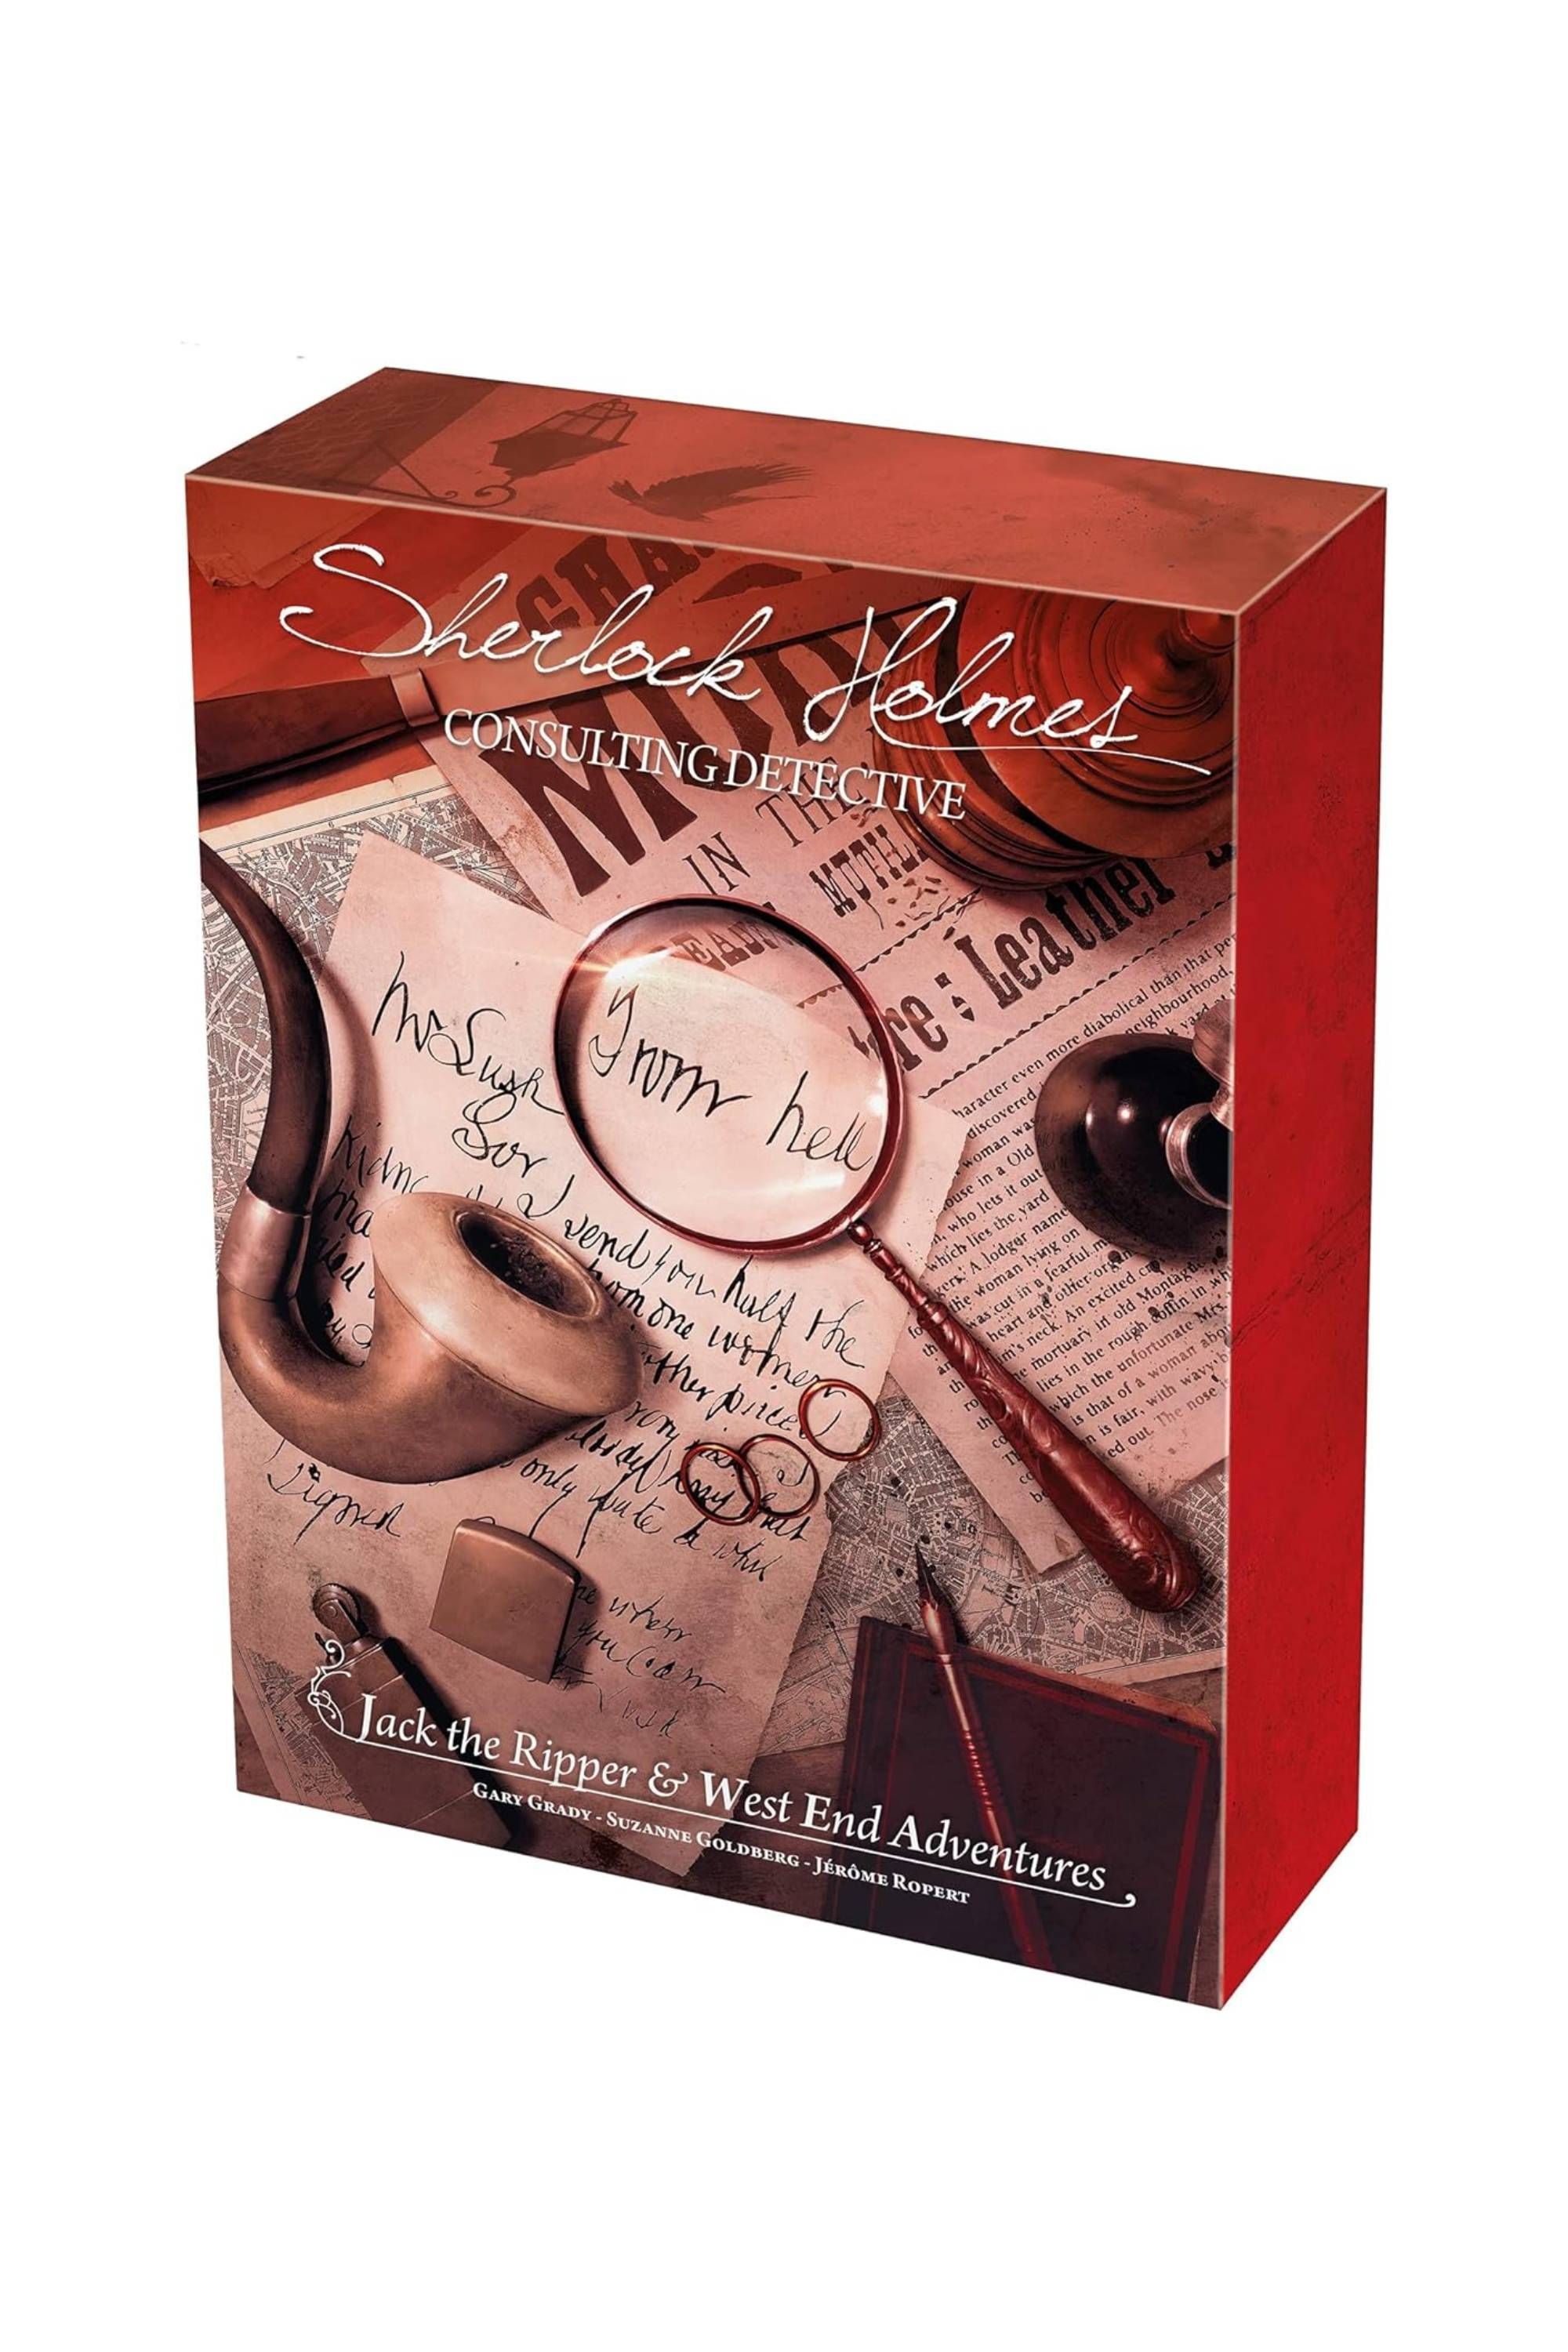 Sherlock Holmes Consulting Detective - Jack the Ripper & West End Adventures